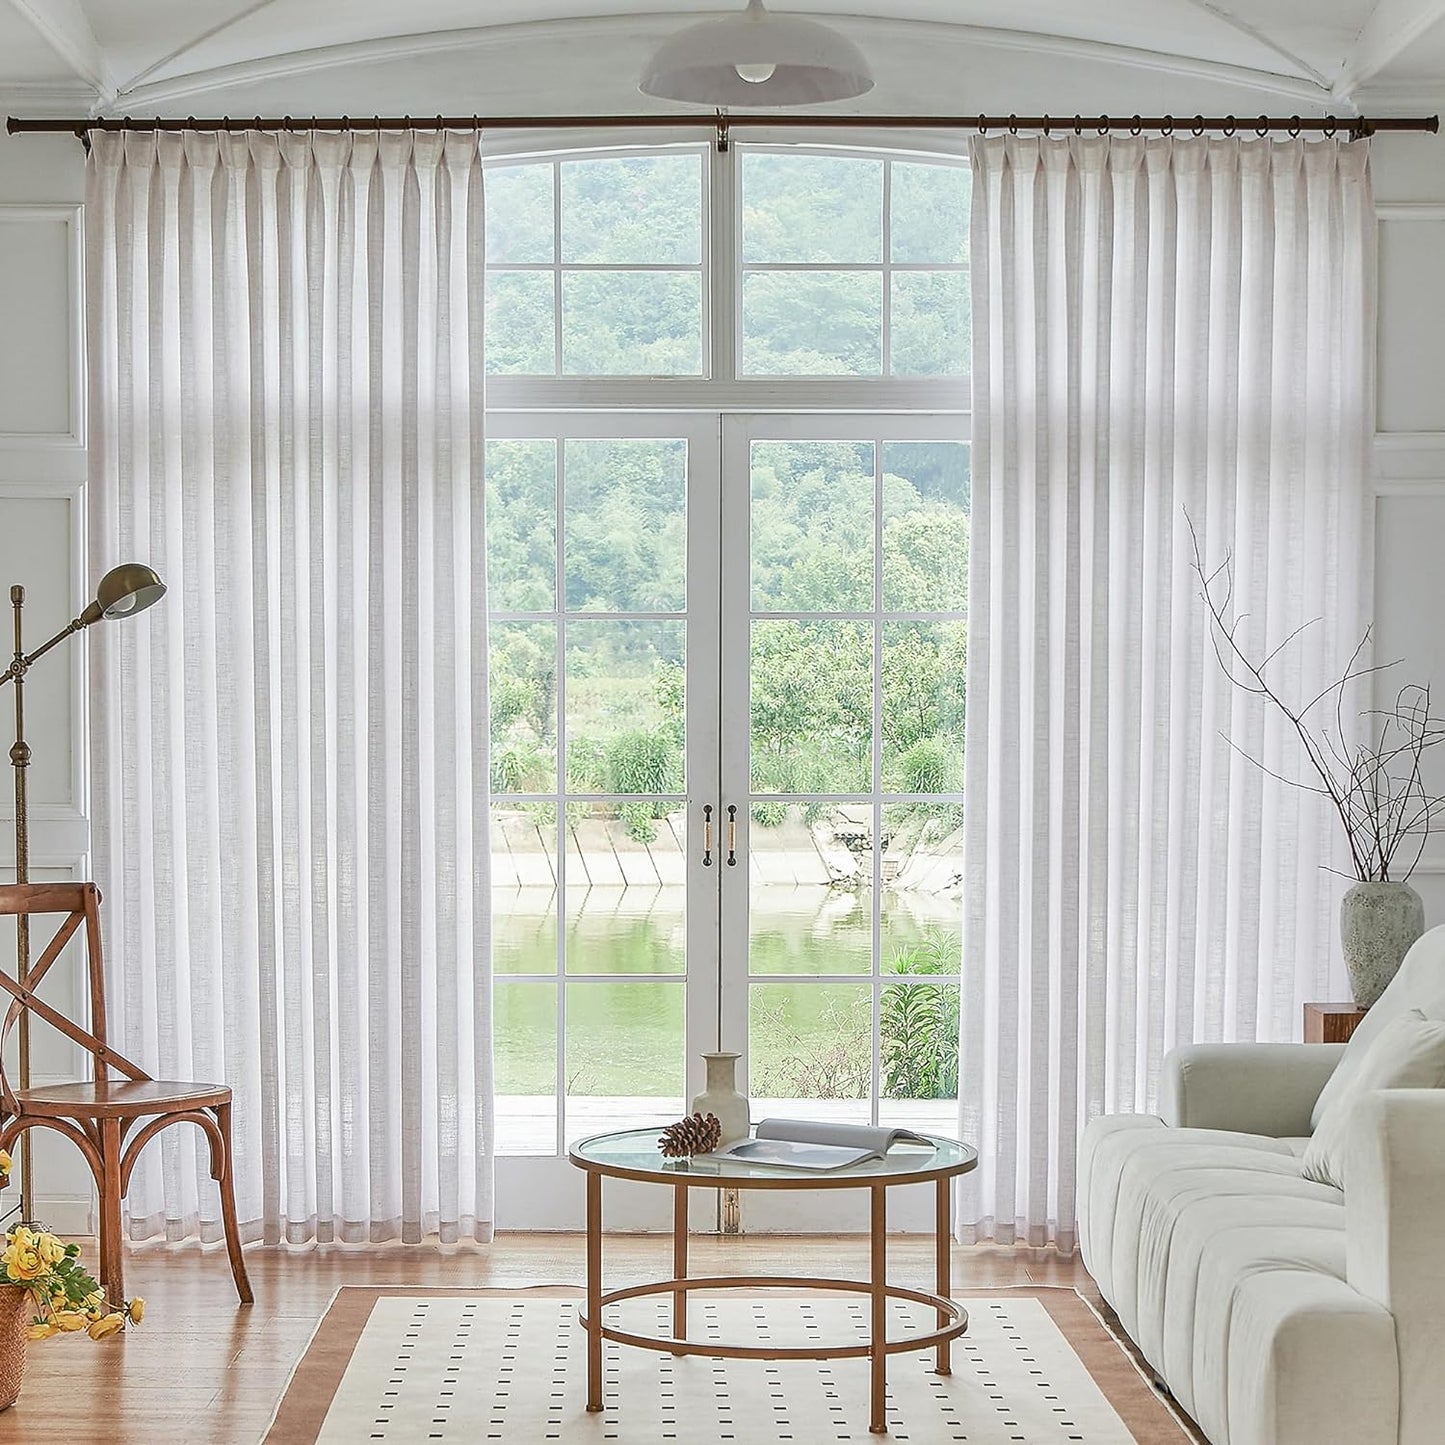 HUTO Extra Wide Pinch Pleated Semi Sheer Curtains, Privacy Light Filtering Beige White Linen Pinch Pleat Drapes 96 Inch Length for Patio Door Living Room Bedroom with Hooks (1 Panel, 100 W X 96 L)  HUTO 2 54"W X 90"L 